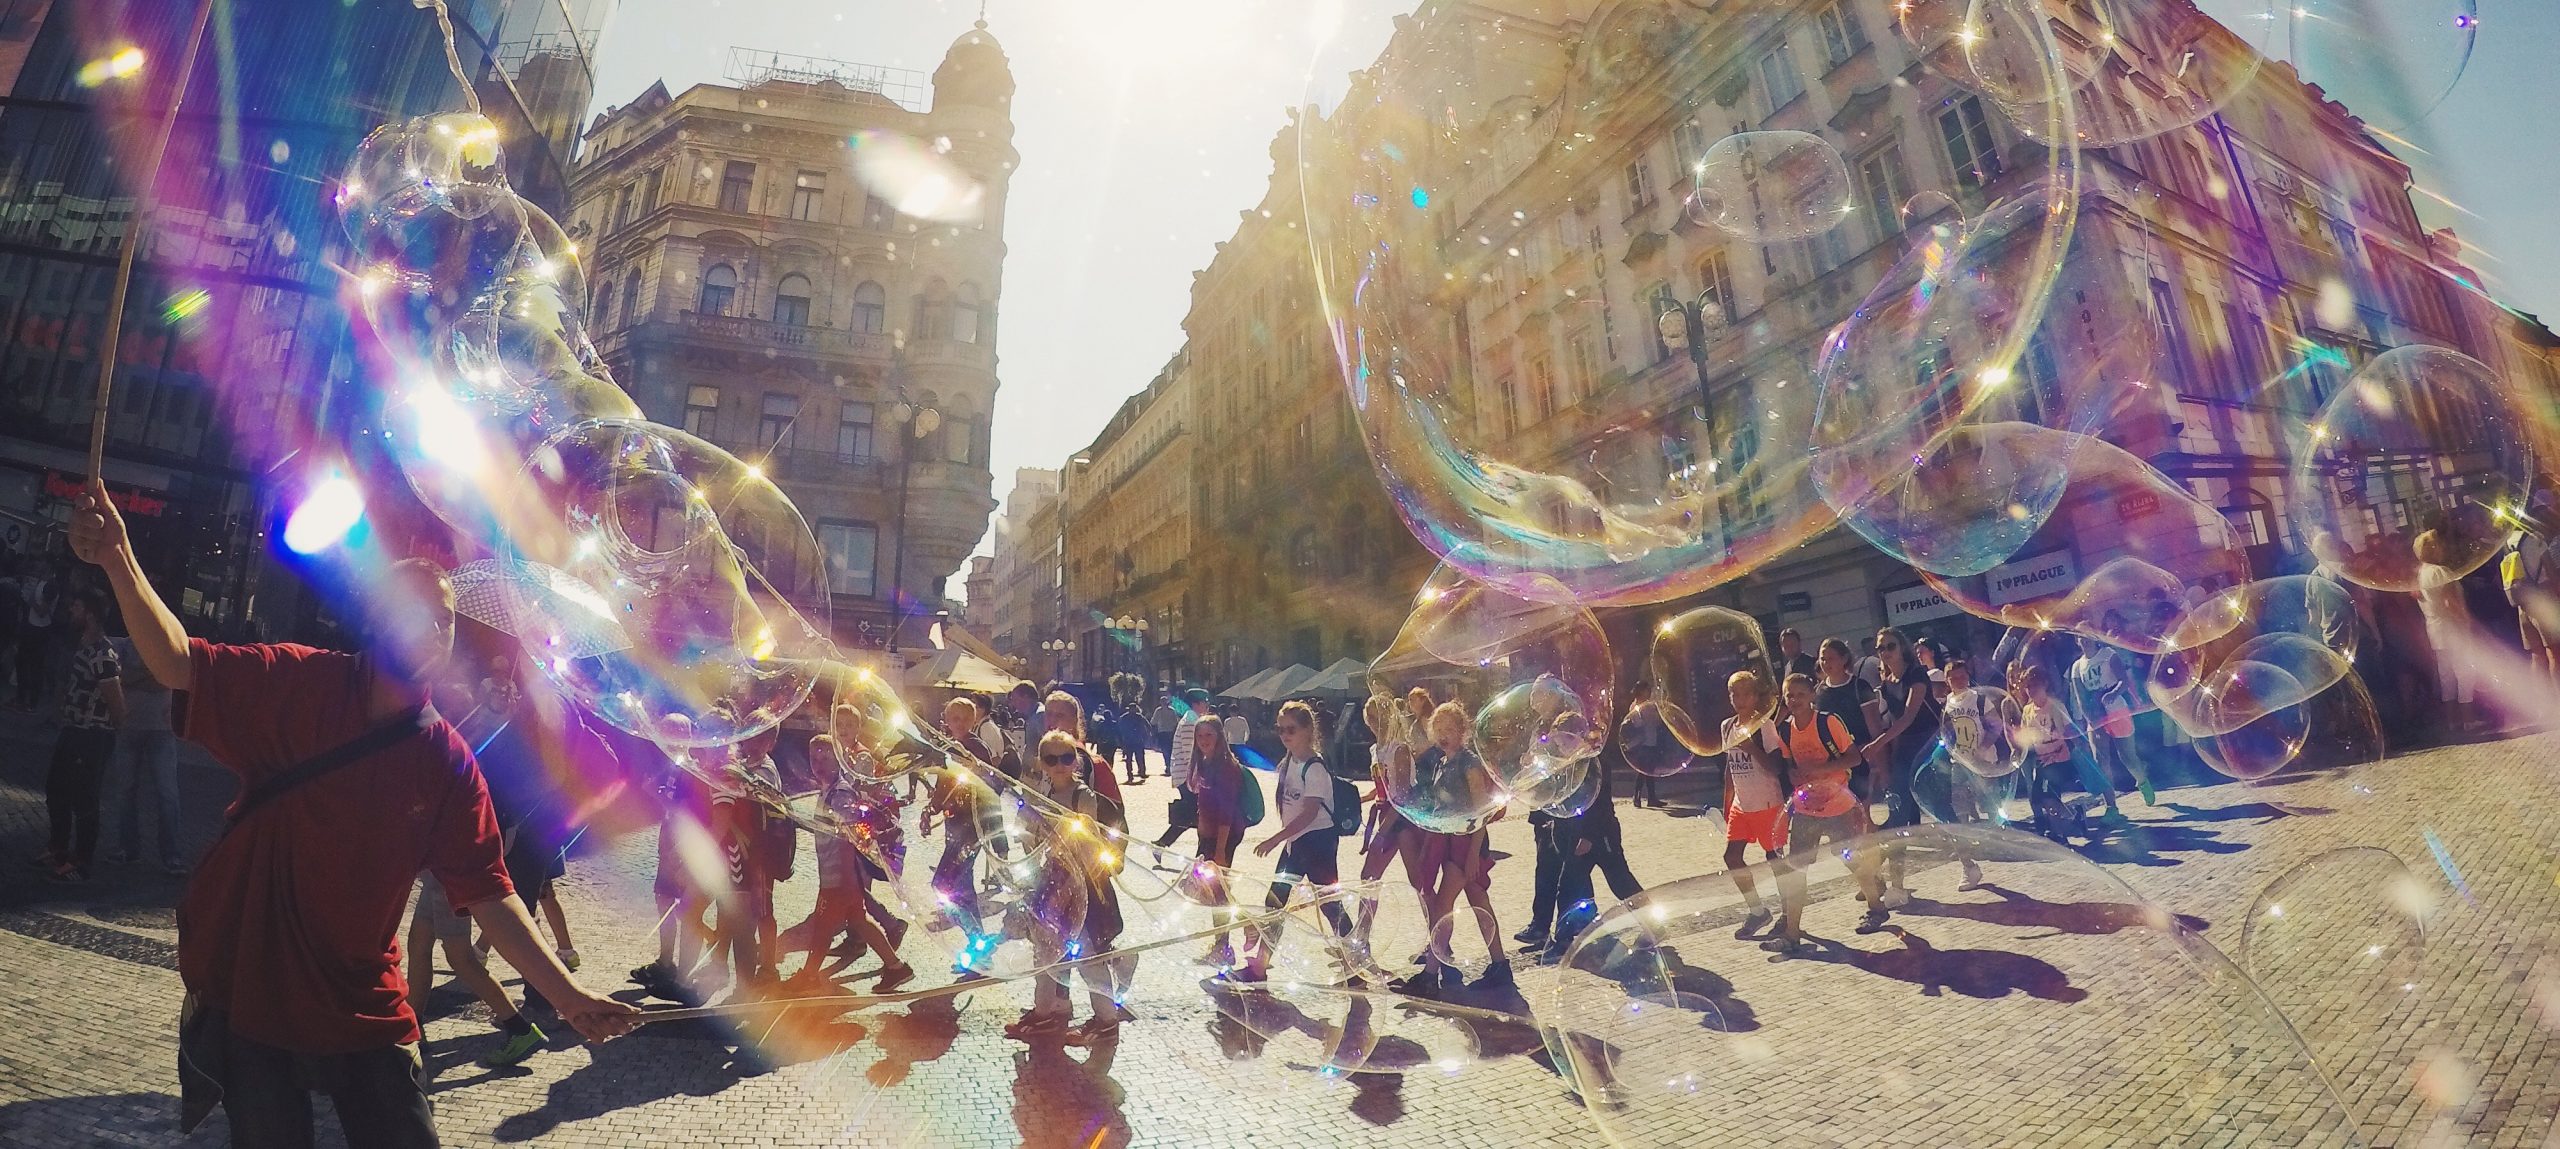 Image of street scene with bubbles